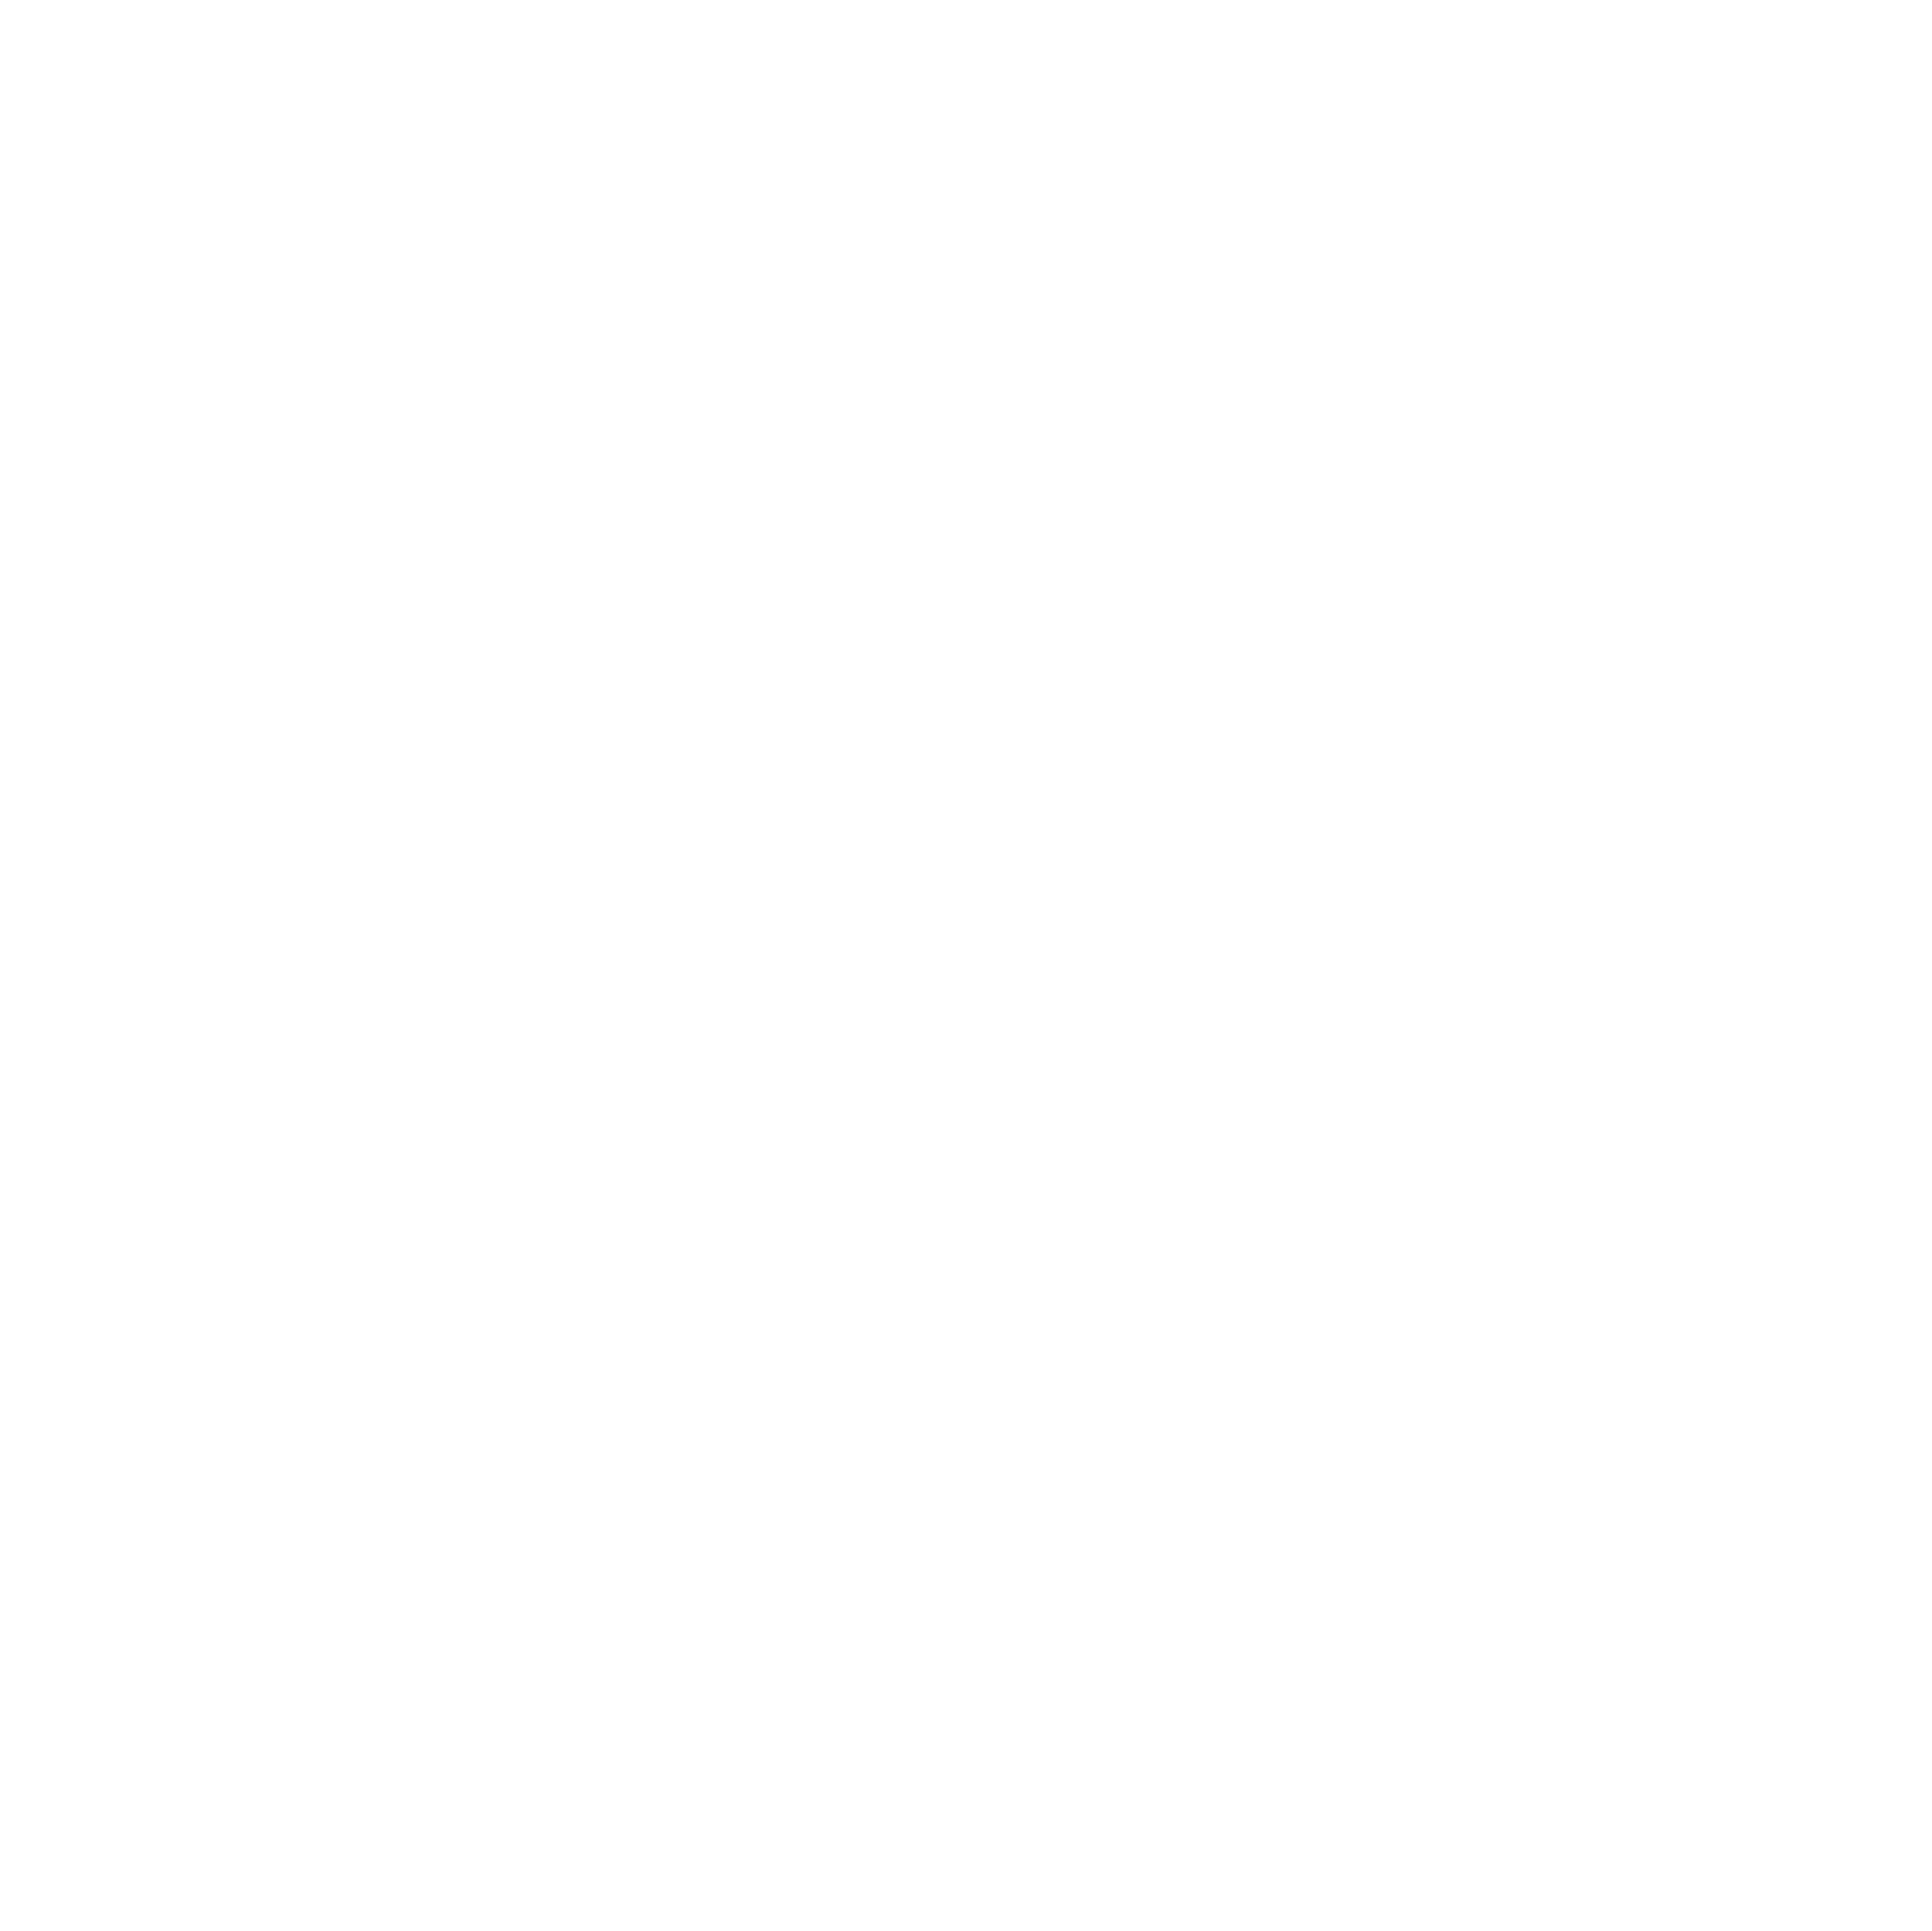 Shooter Logo - Active Shooter | Compliance Training | Make Your Campus Safer Today